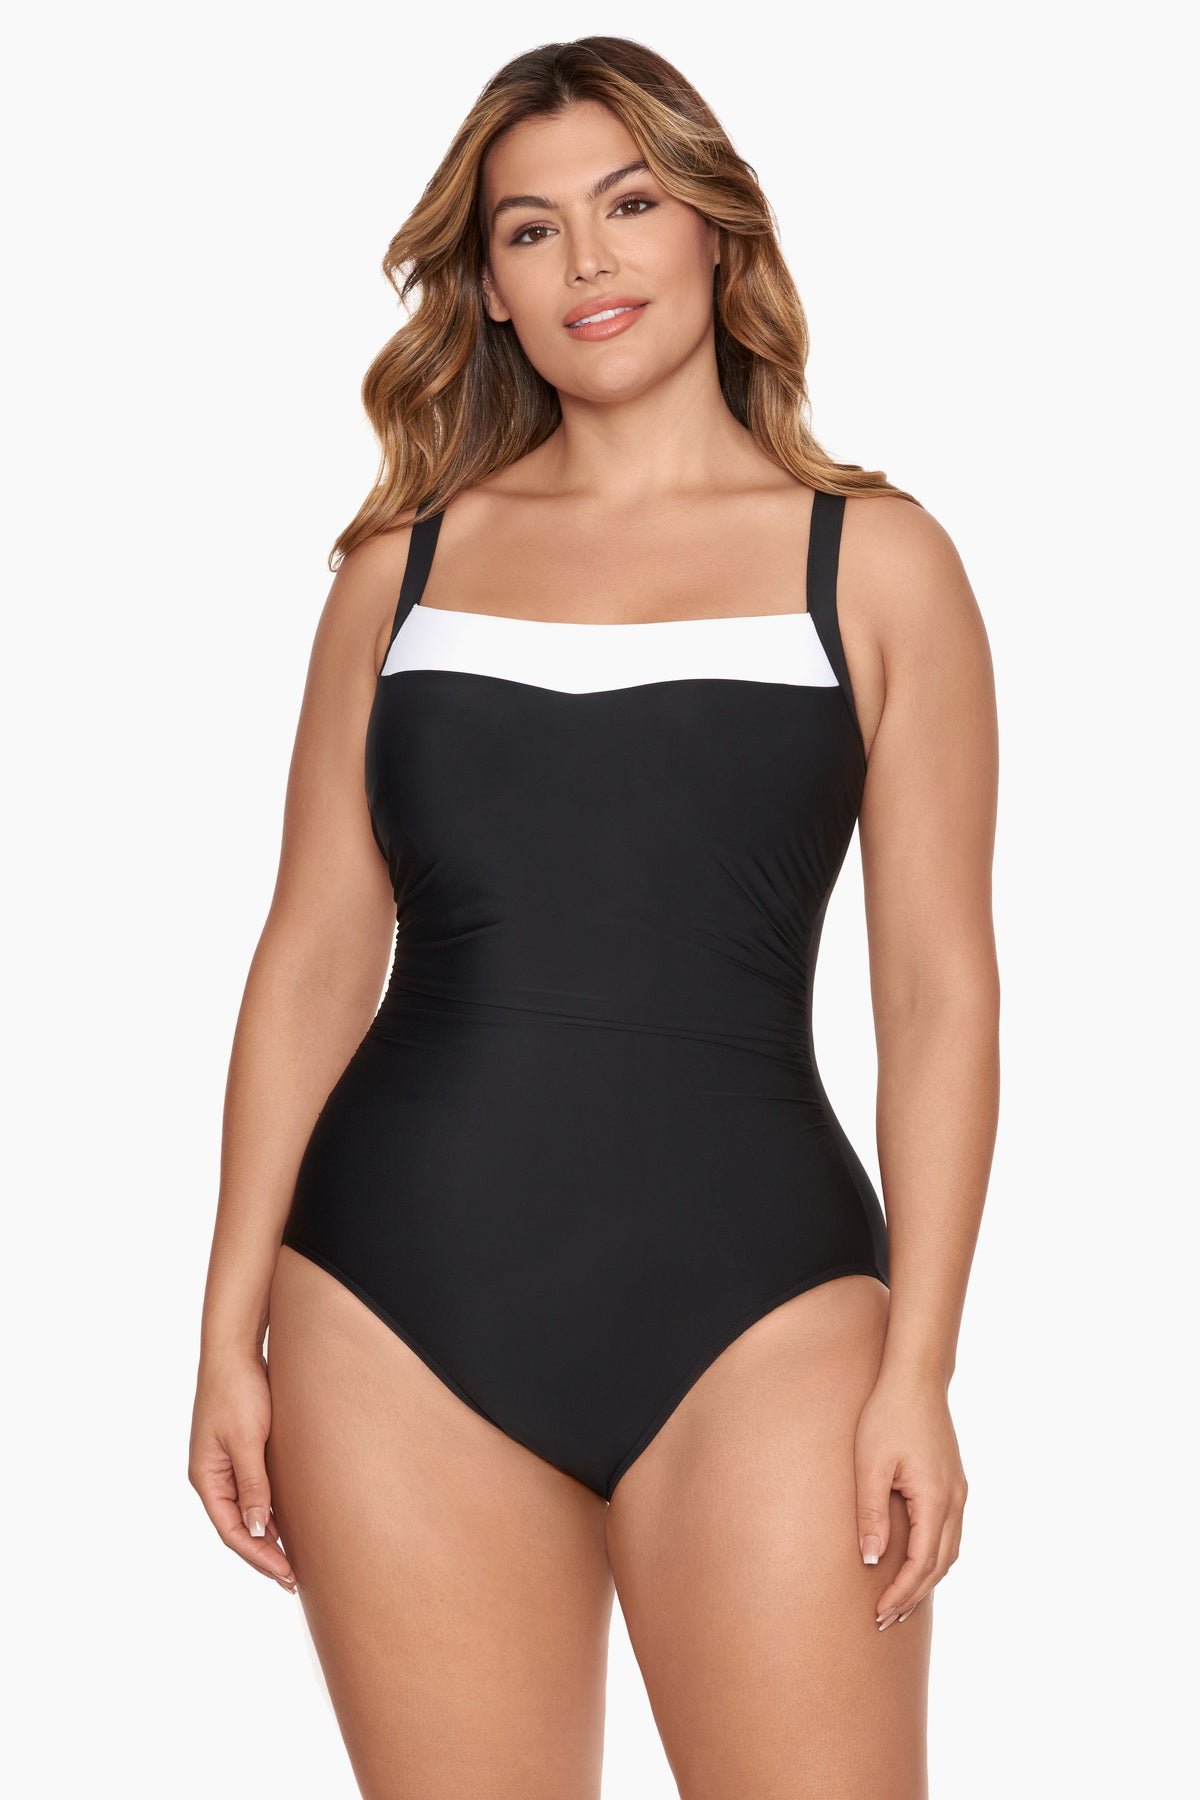 Miraclesuit Colorblock Kara One Piece Swimsuit DD-Cup